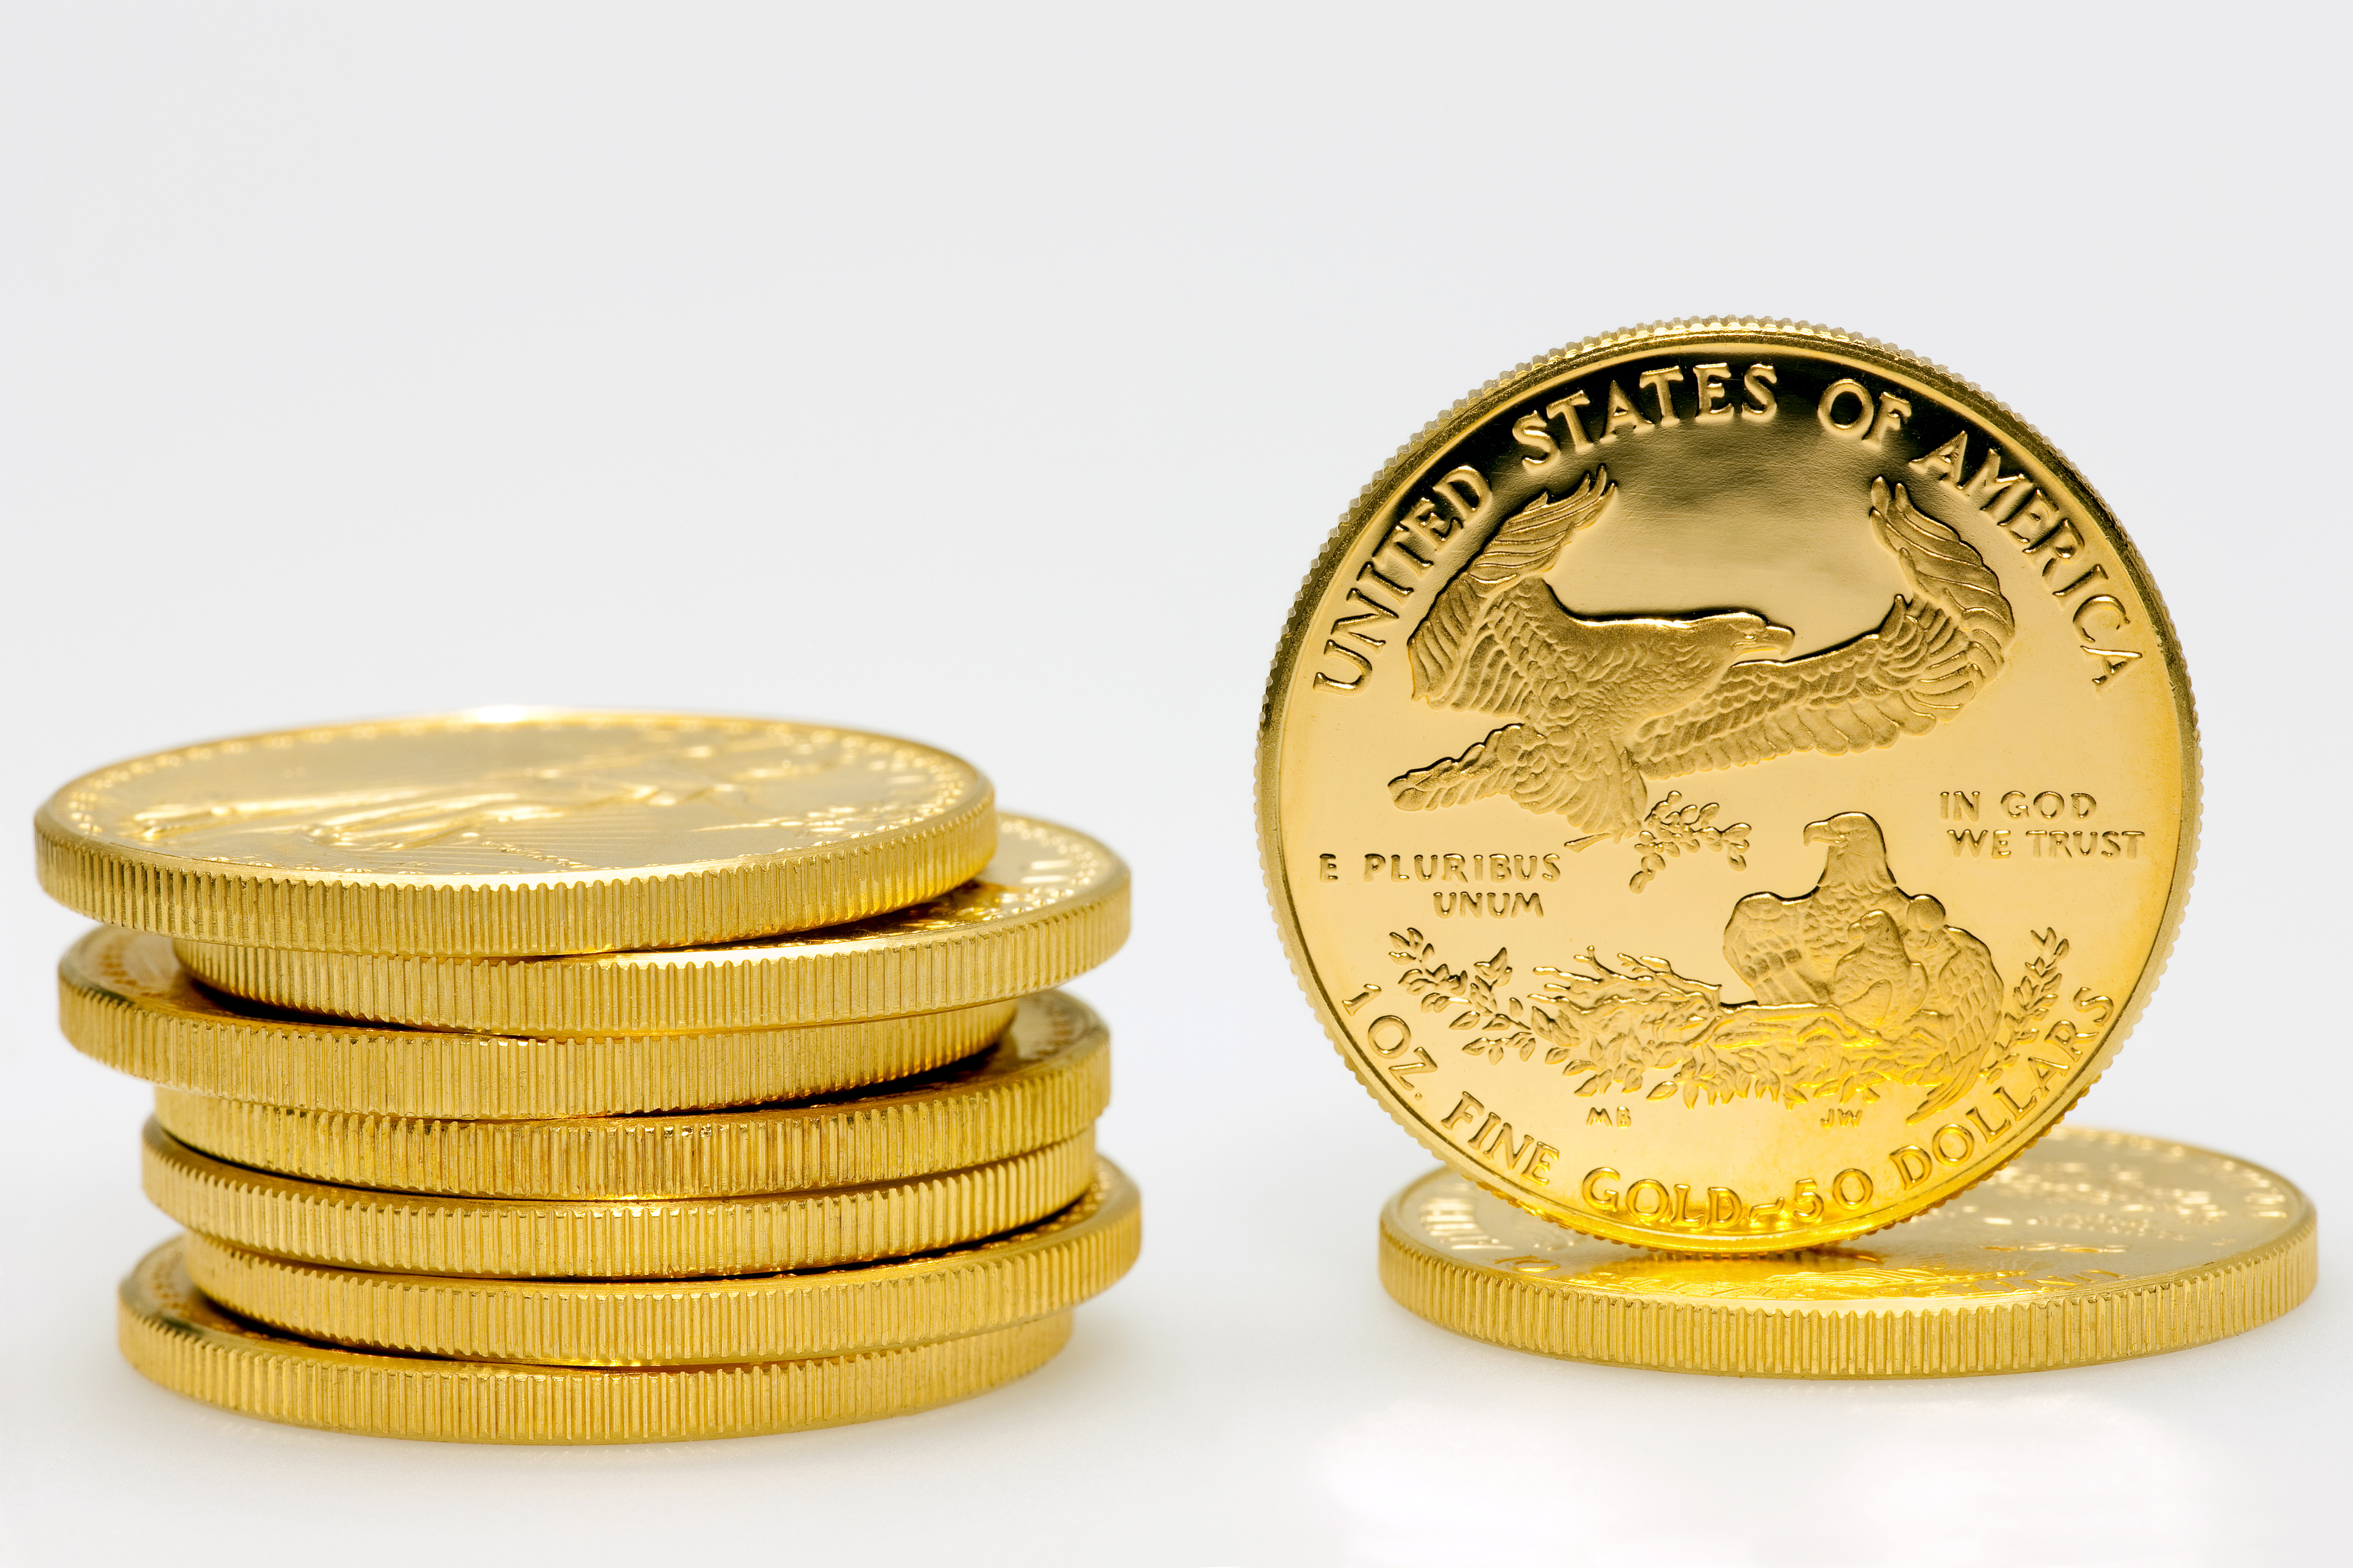 Buying Coin leads, gold coins